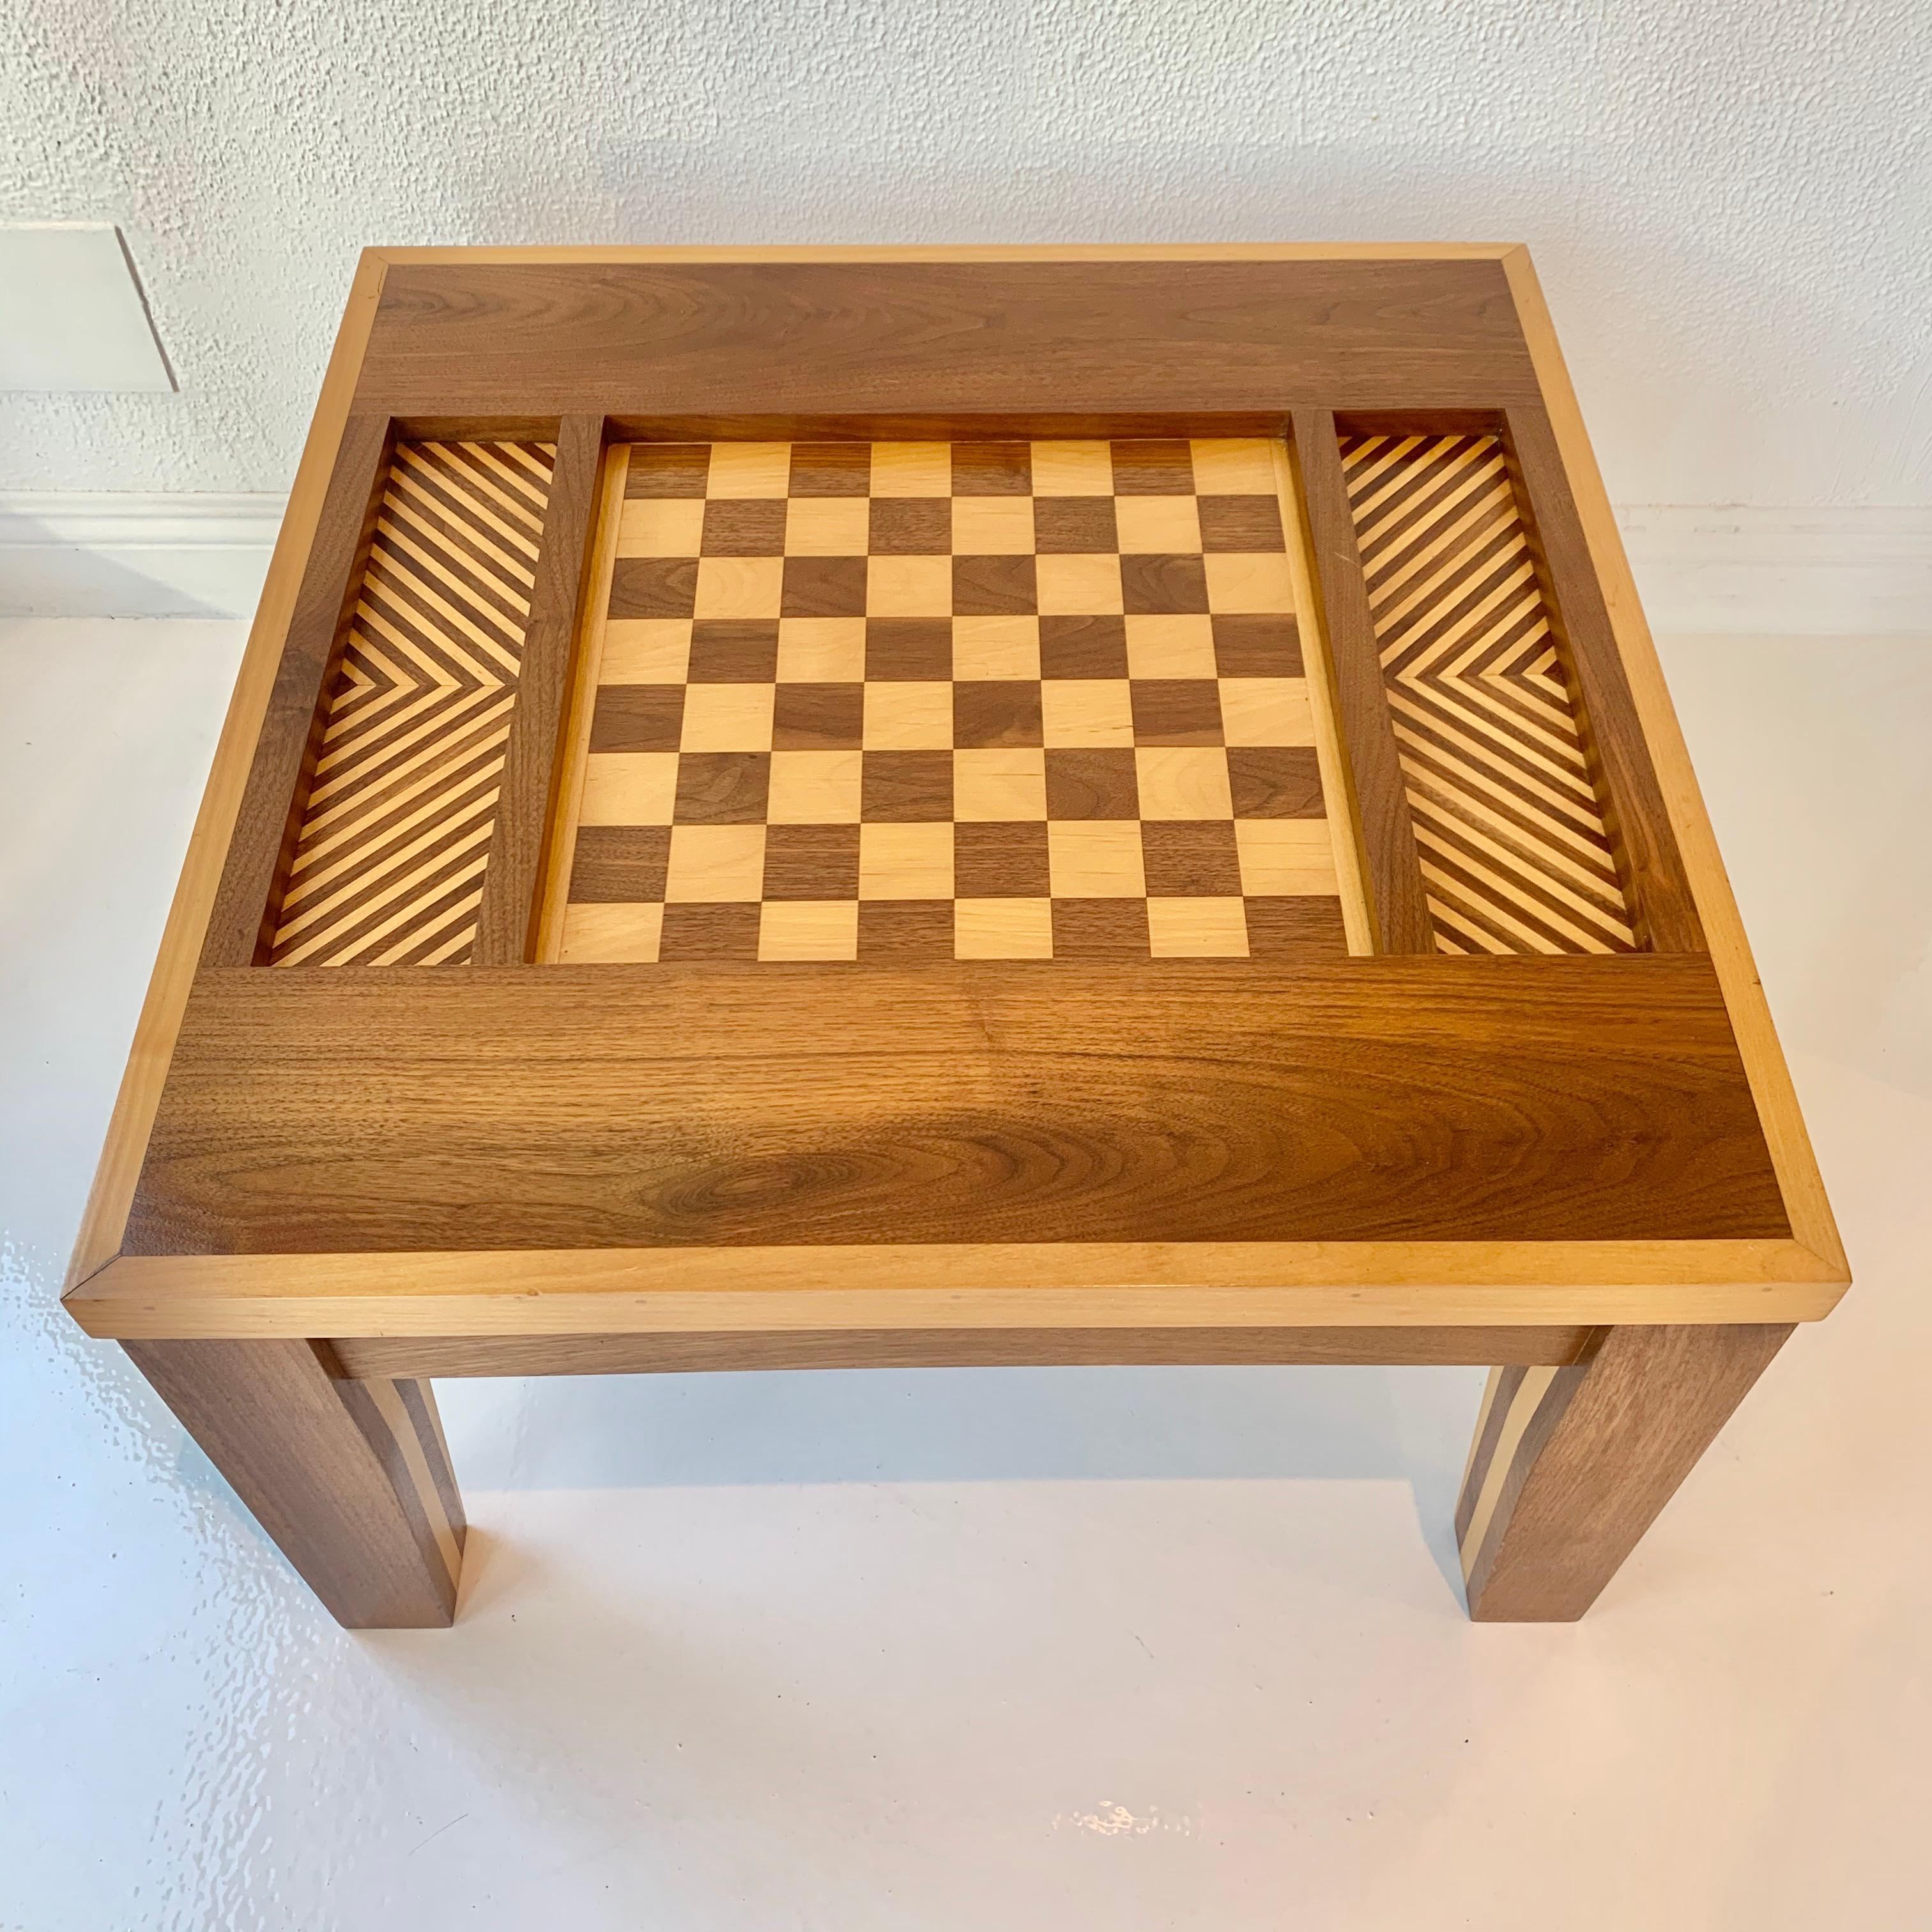 Stunning handmade chess table made of Walnut and Alder. Gorgeous coloring. Parquet design flank both sides of the alternating wood game board. Perfect game table. Great as a side table between two chairs when not in use.